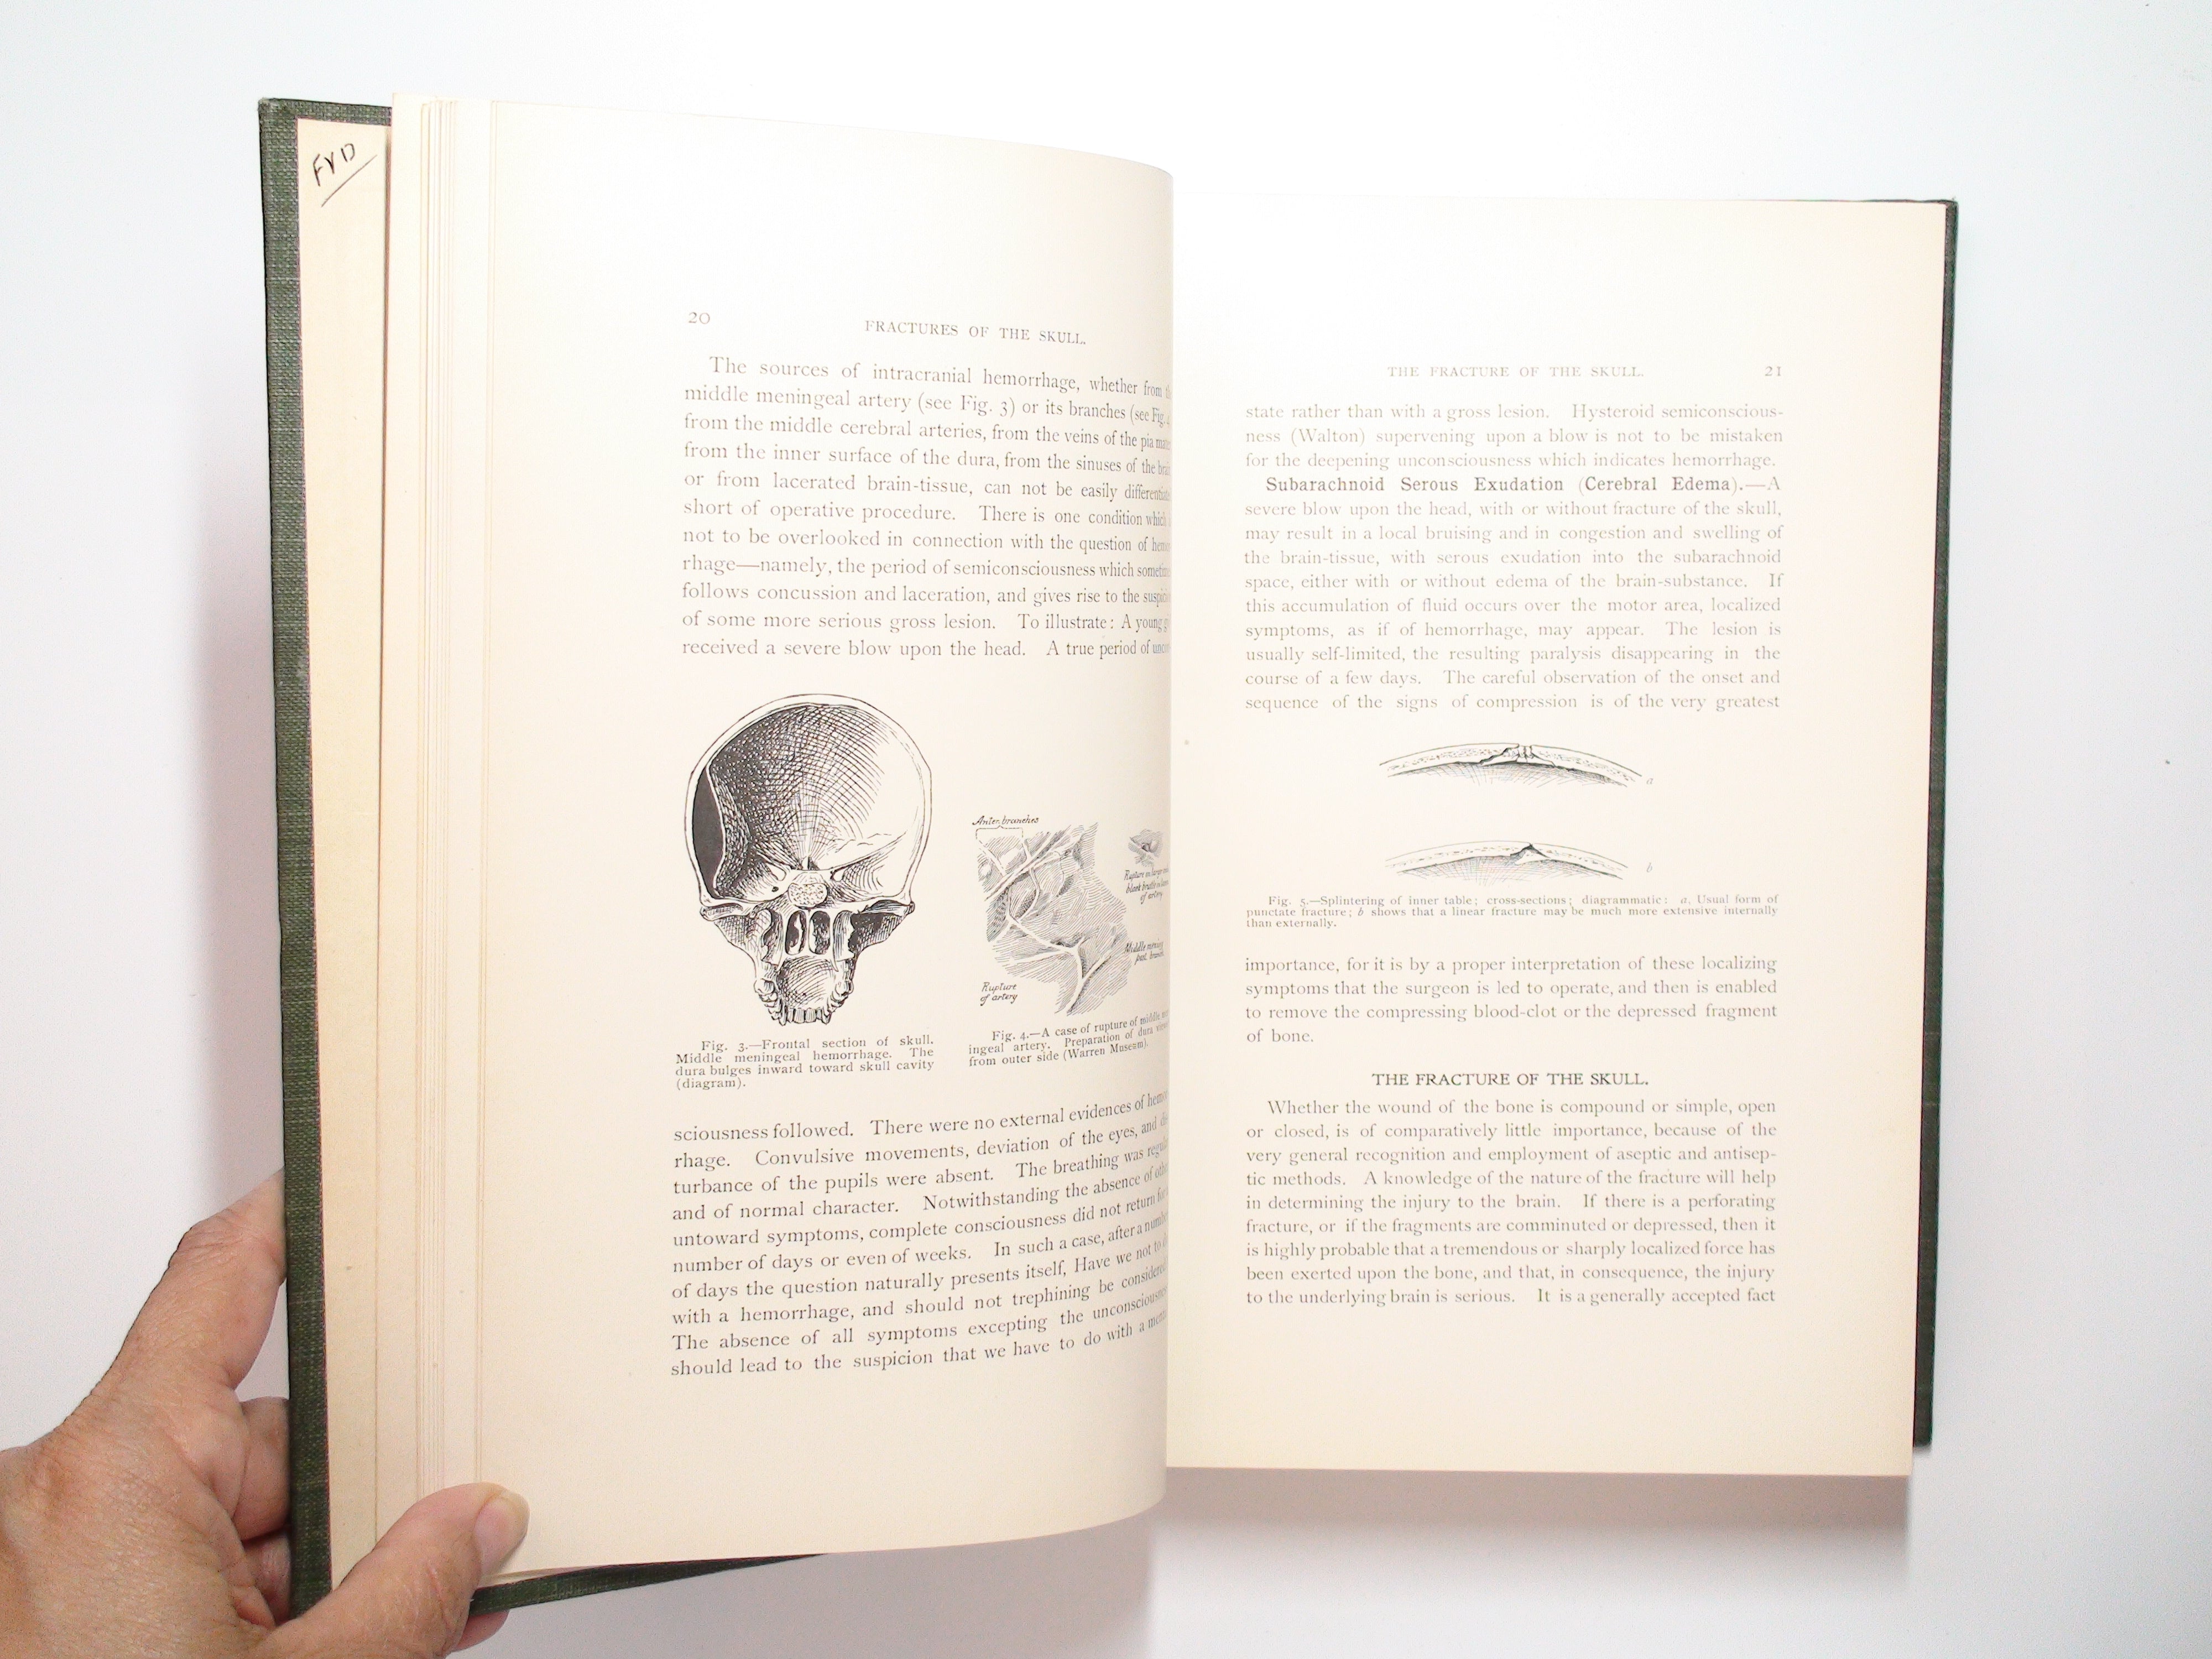 Treatment of Fractures, Charles Locke Scudder, Illustrated, 1st Ed, 1900